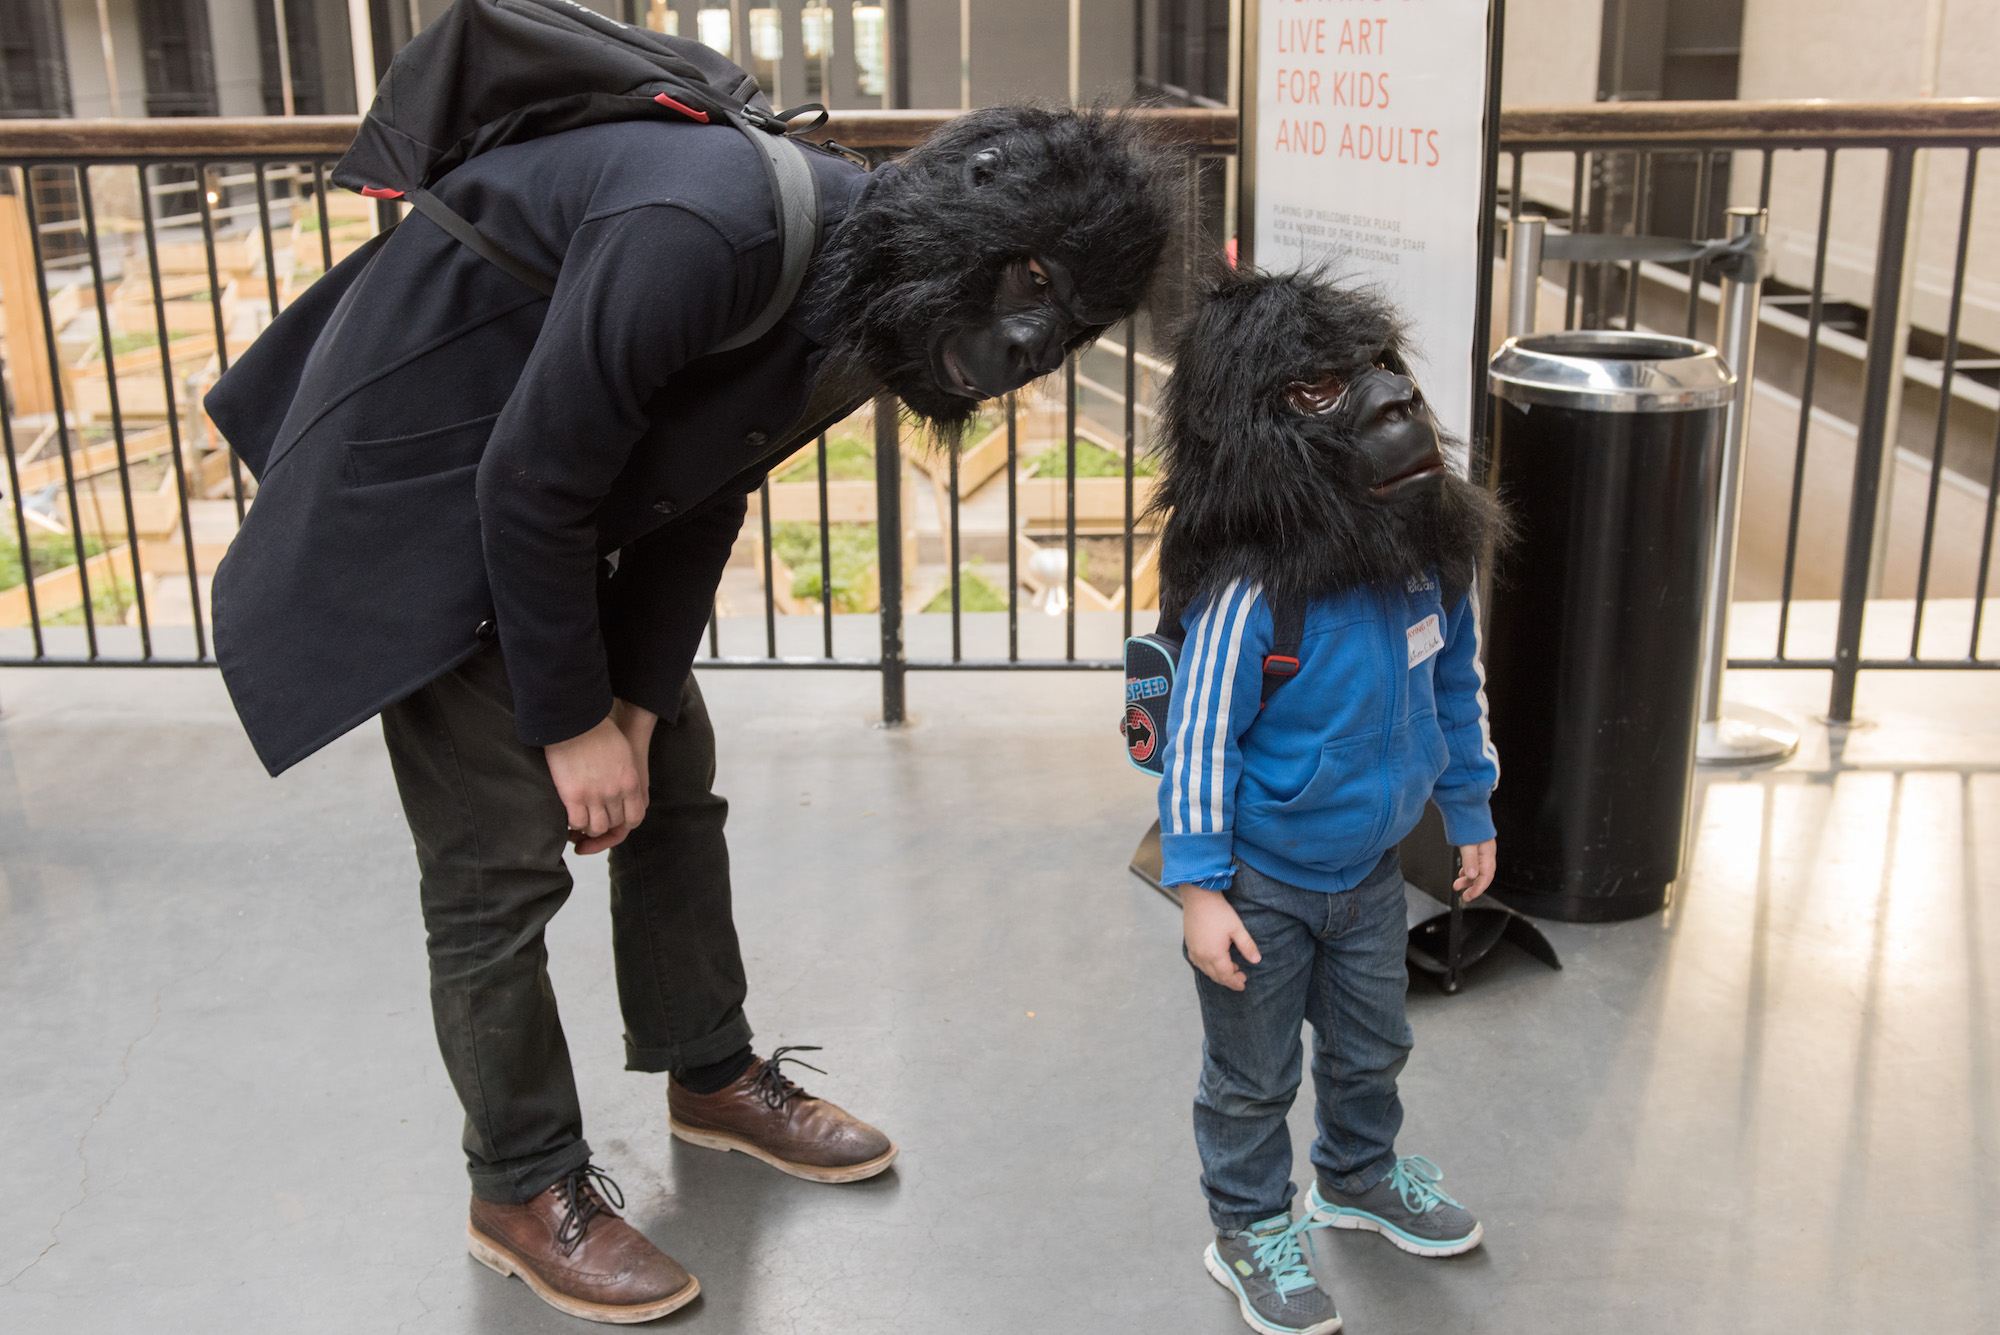 An adult dressed in a black coat wearing a gorilla mask leaning of a child in a blue sports jacket wearing a gorilla mask.